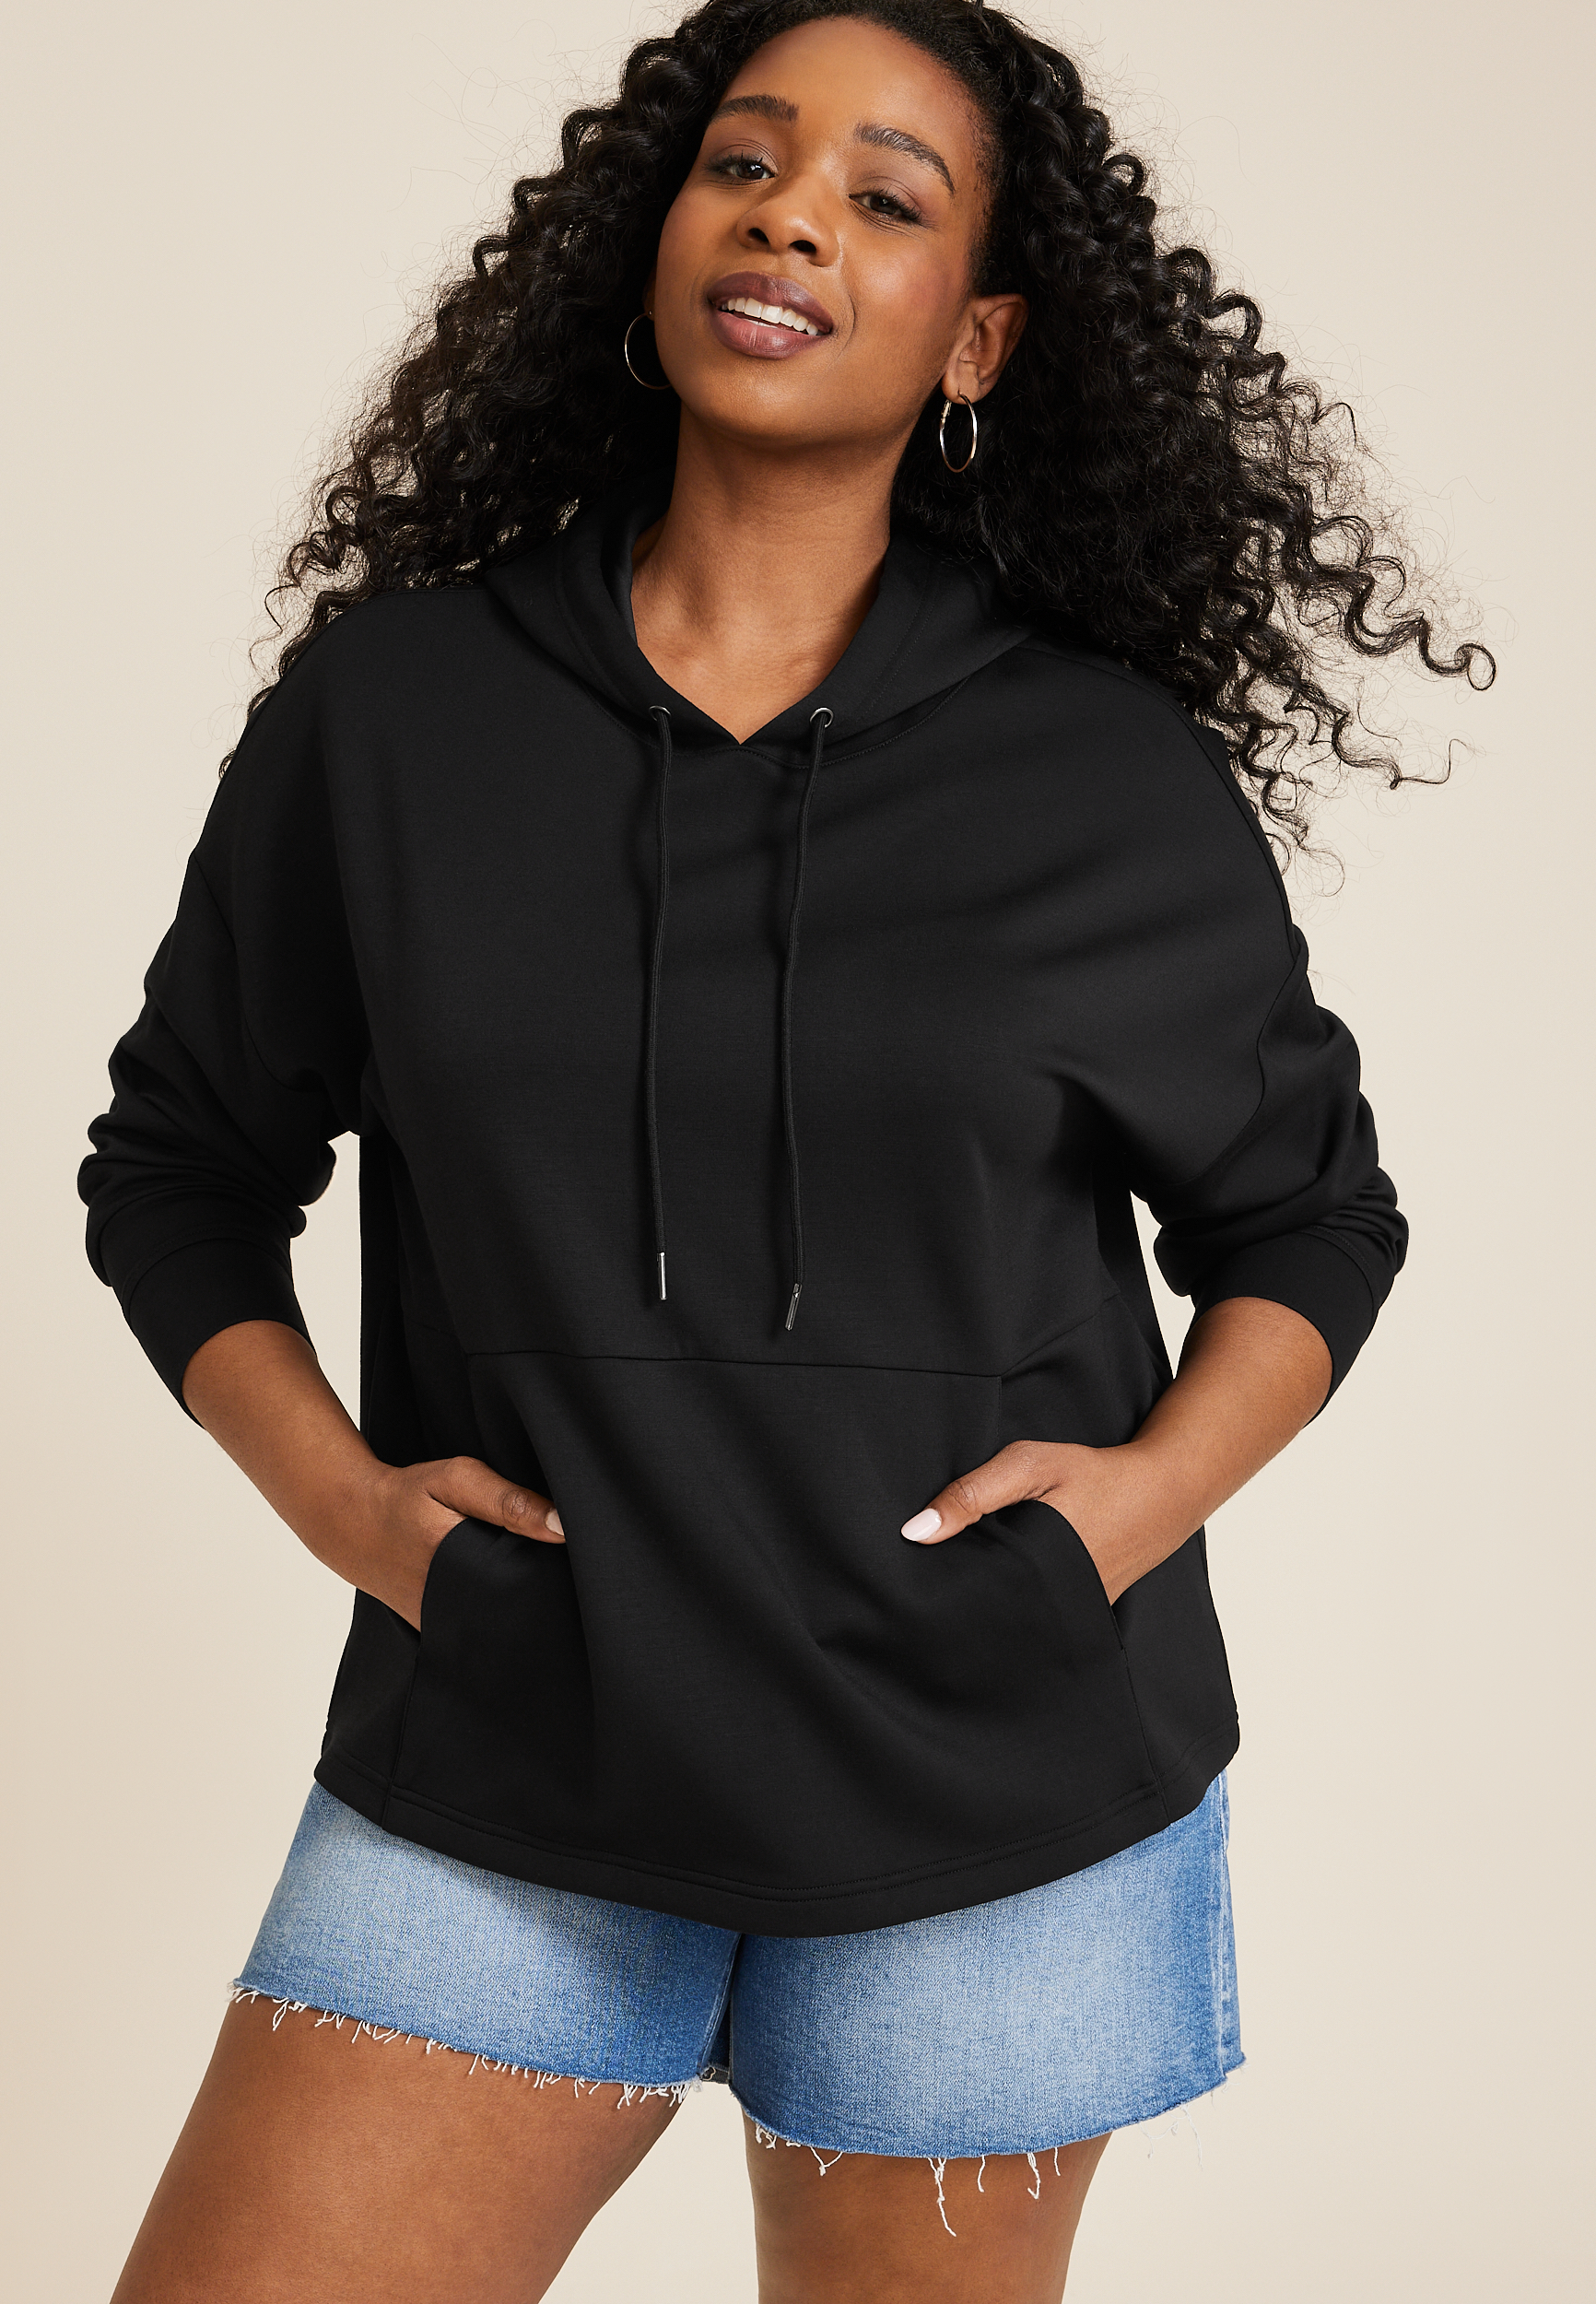   Essentials Women's Crop Hoodie Sweatshirt (Available in  Plus Size), Black, X-Large : Clothing, Shoes & Jewelry